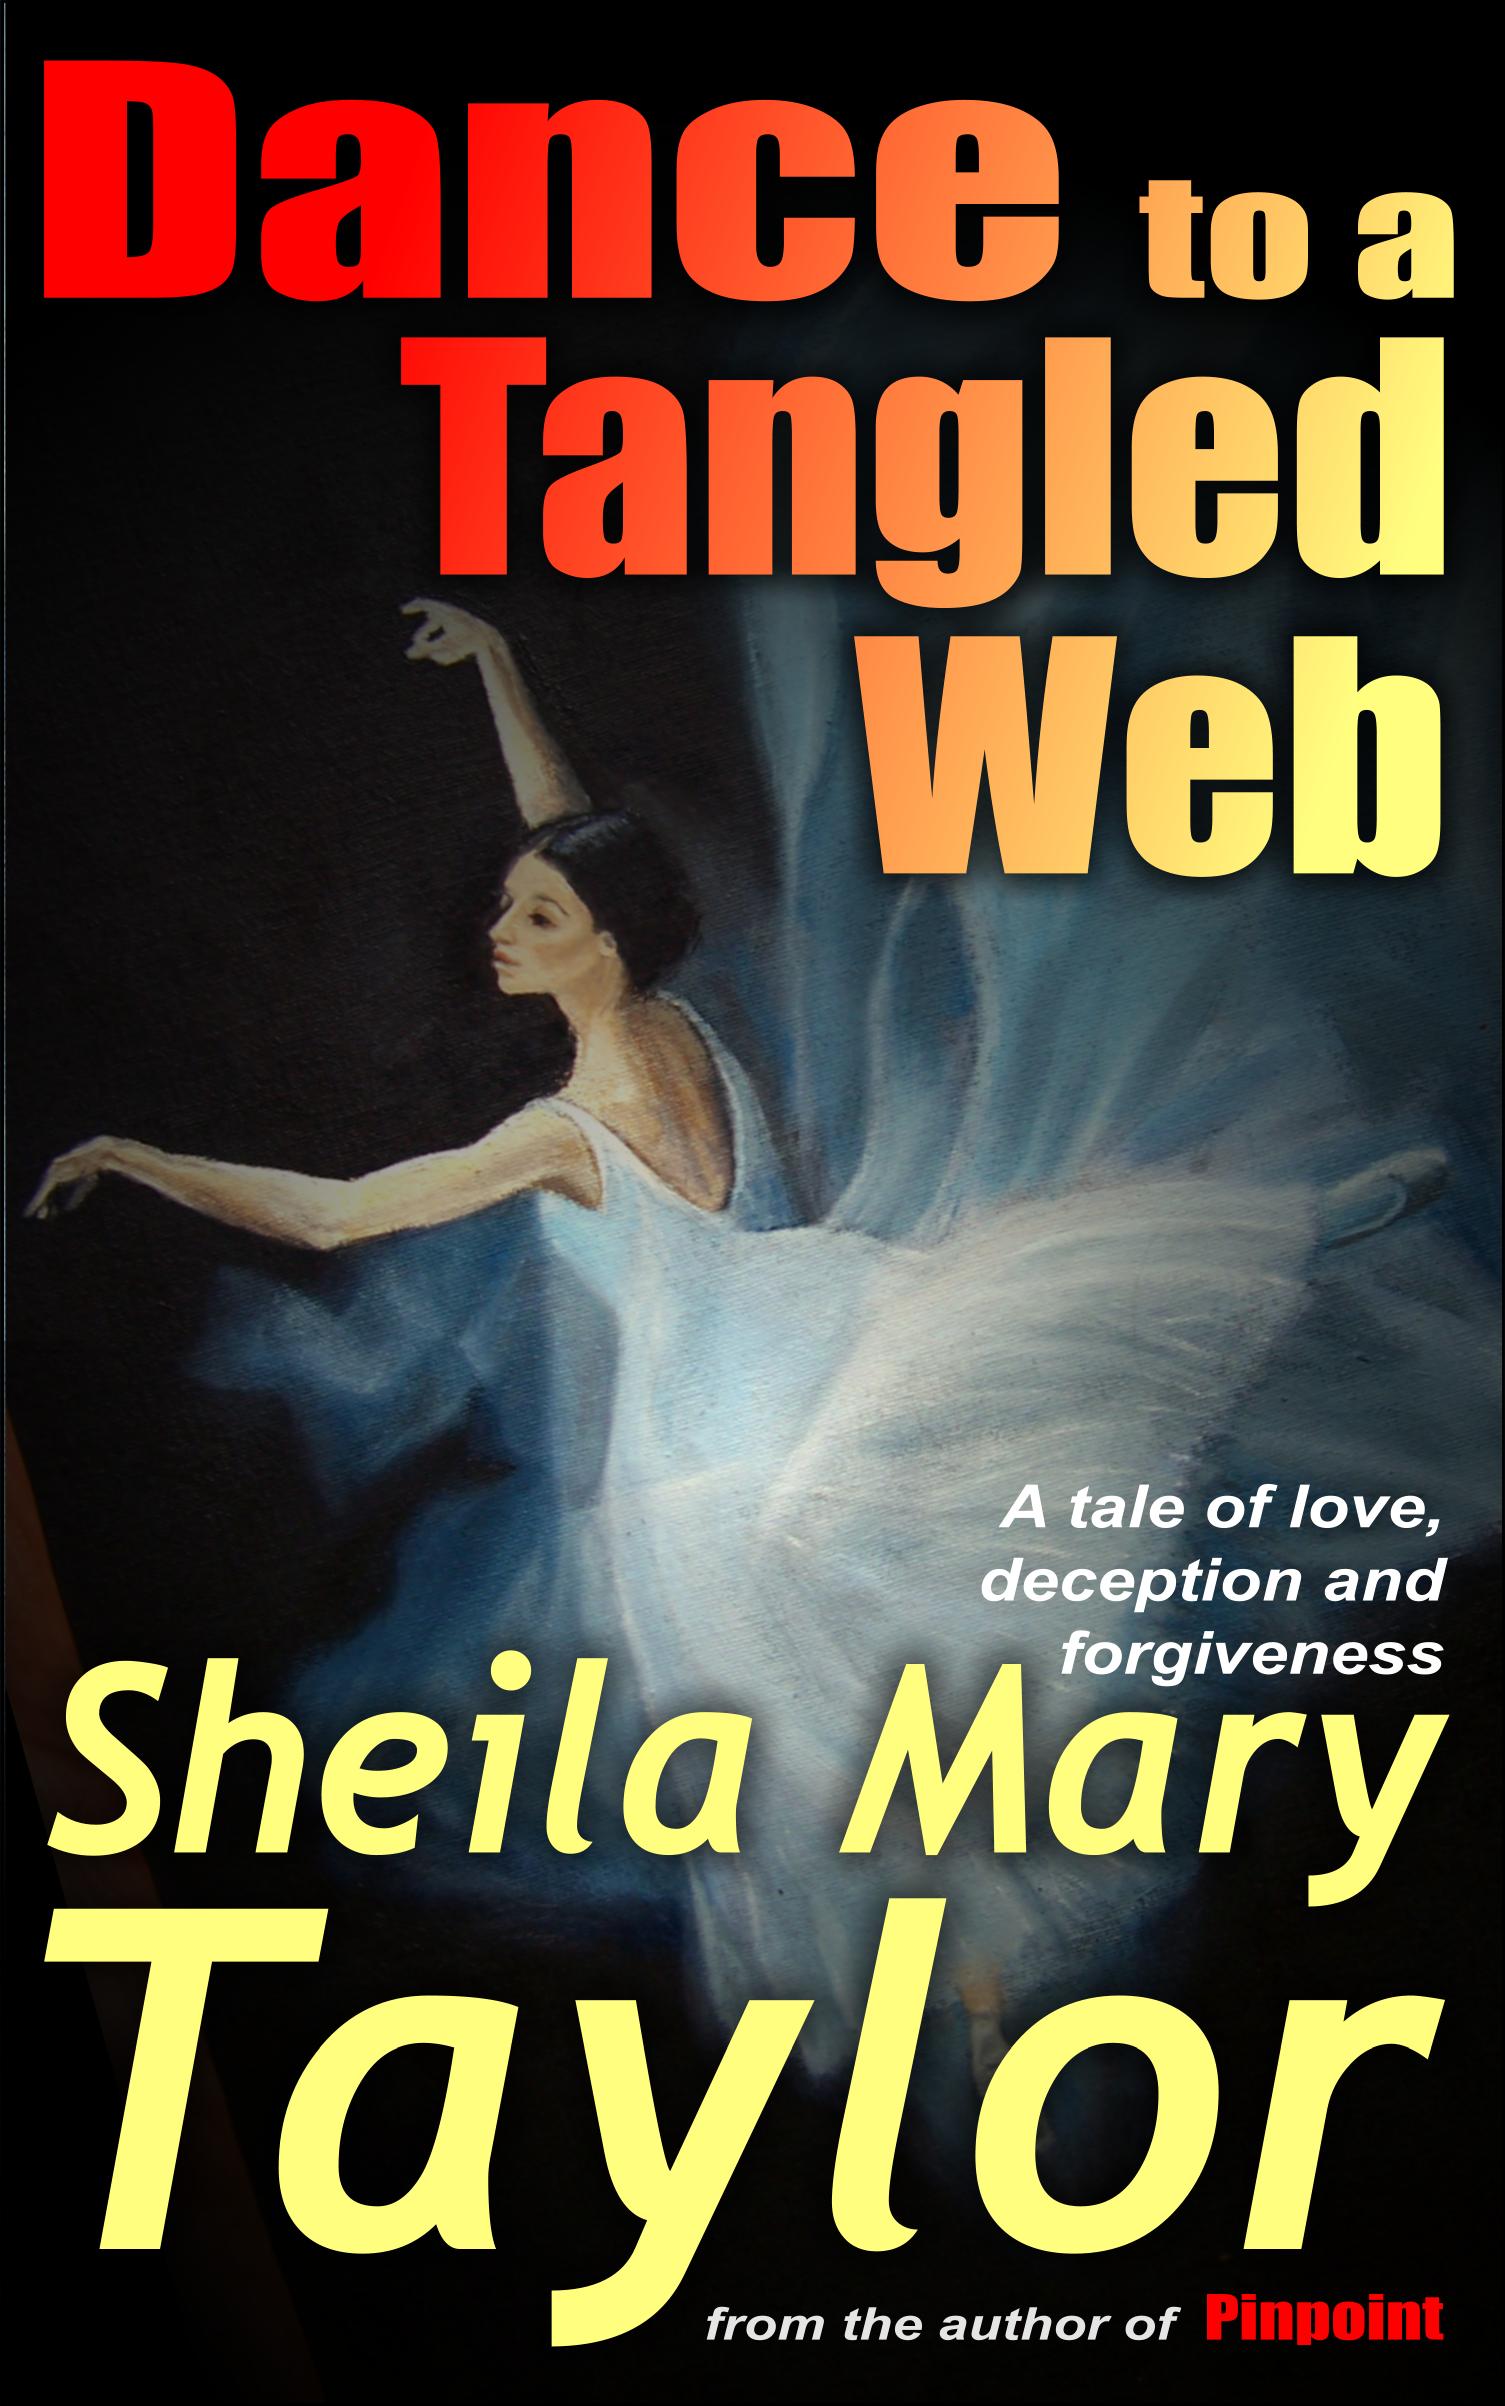 Download Kindle edition of Dance to a Tangled Web from your local Amazon Kindle store